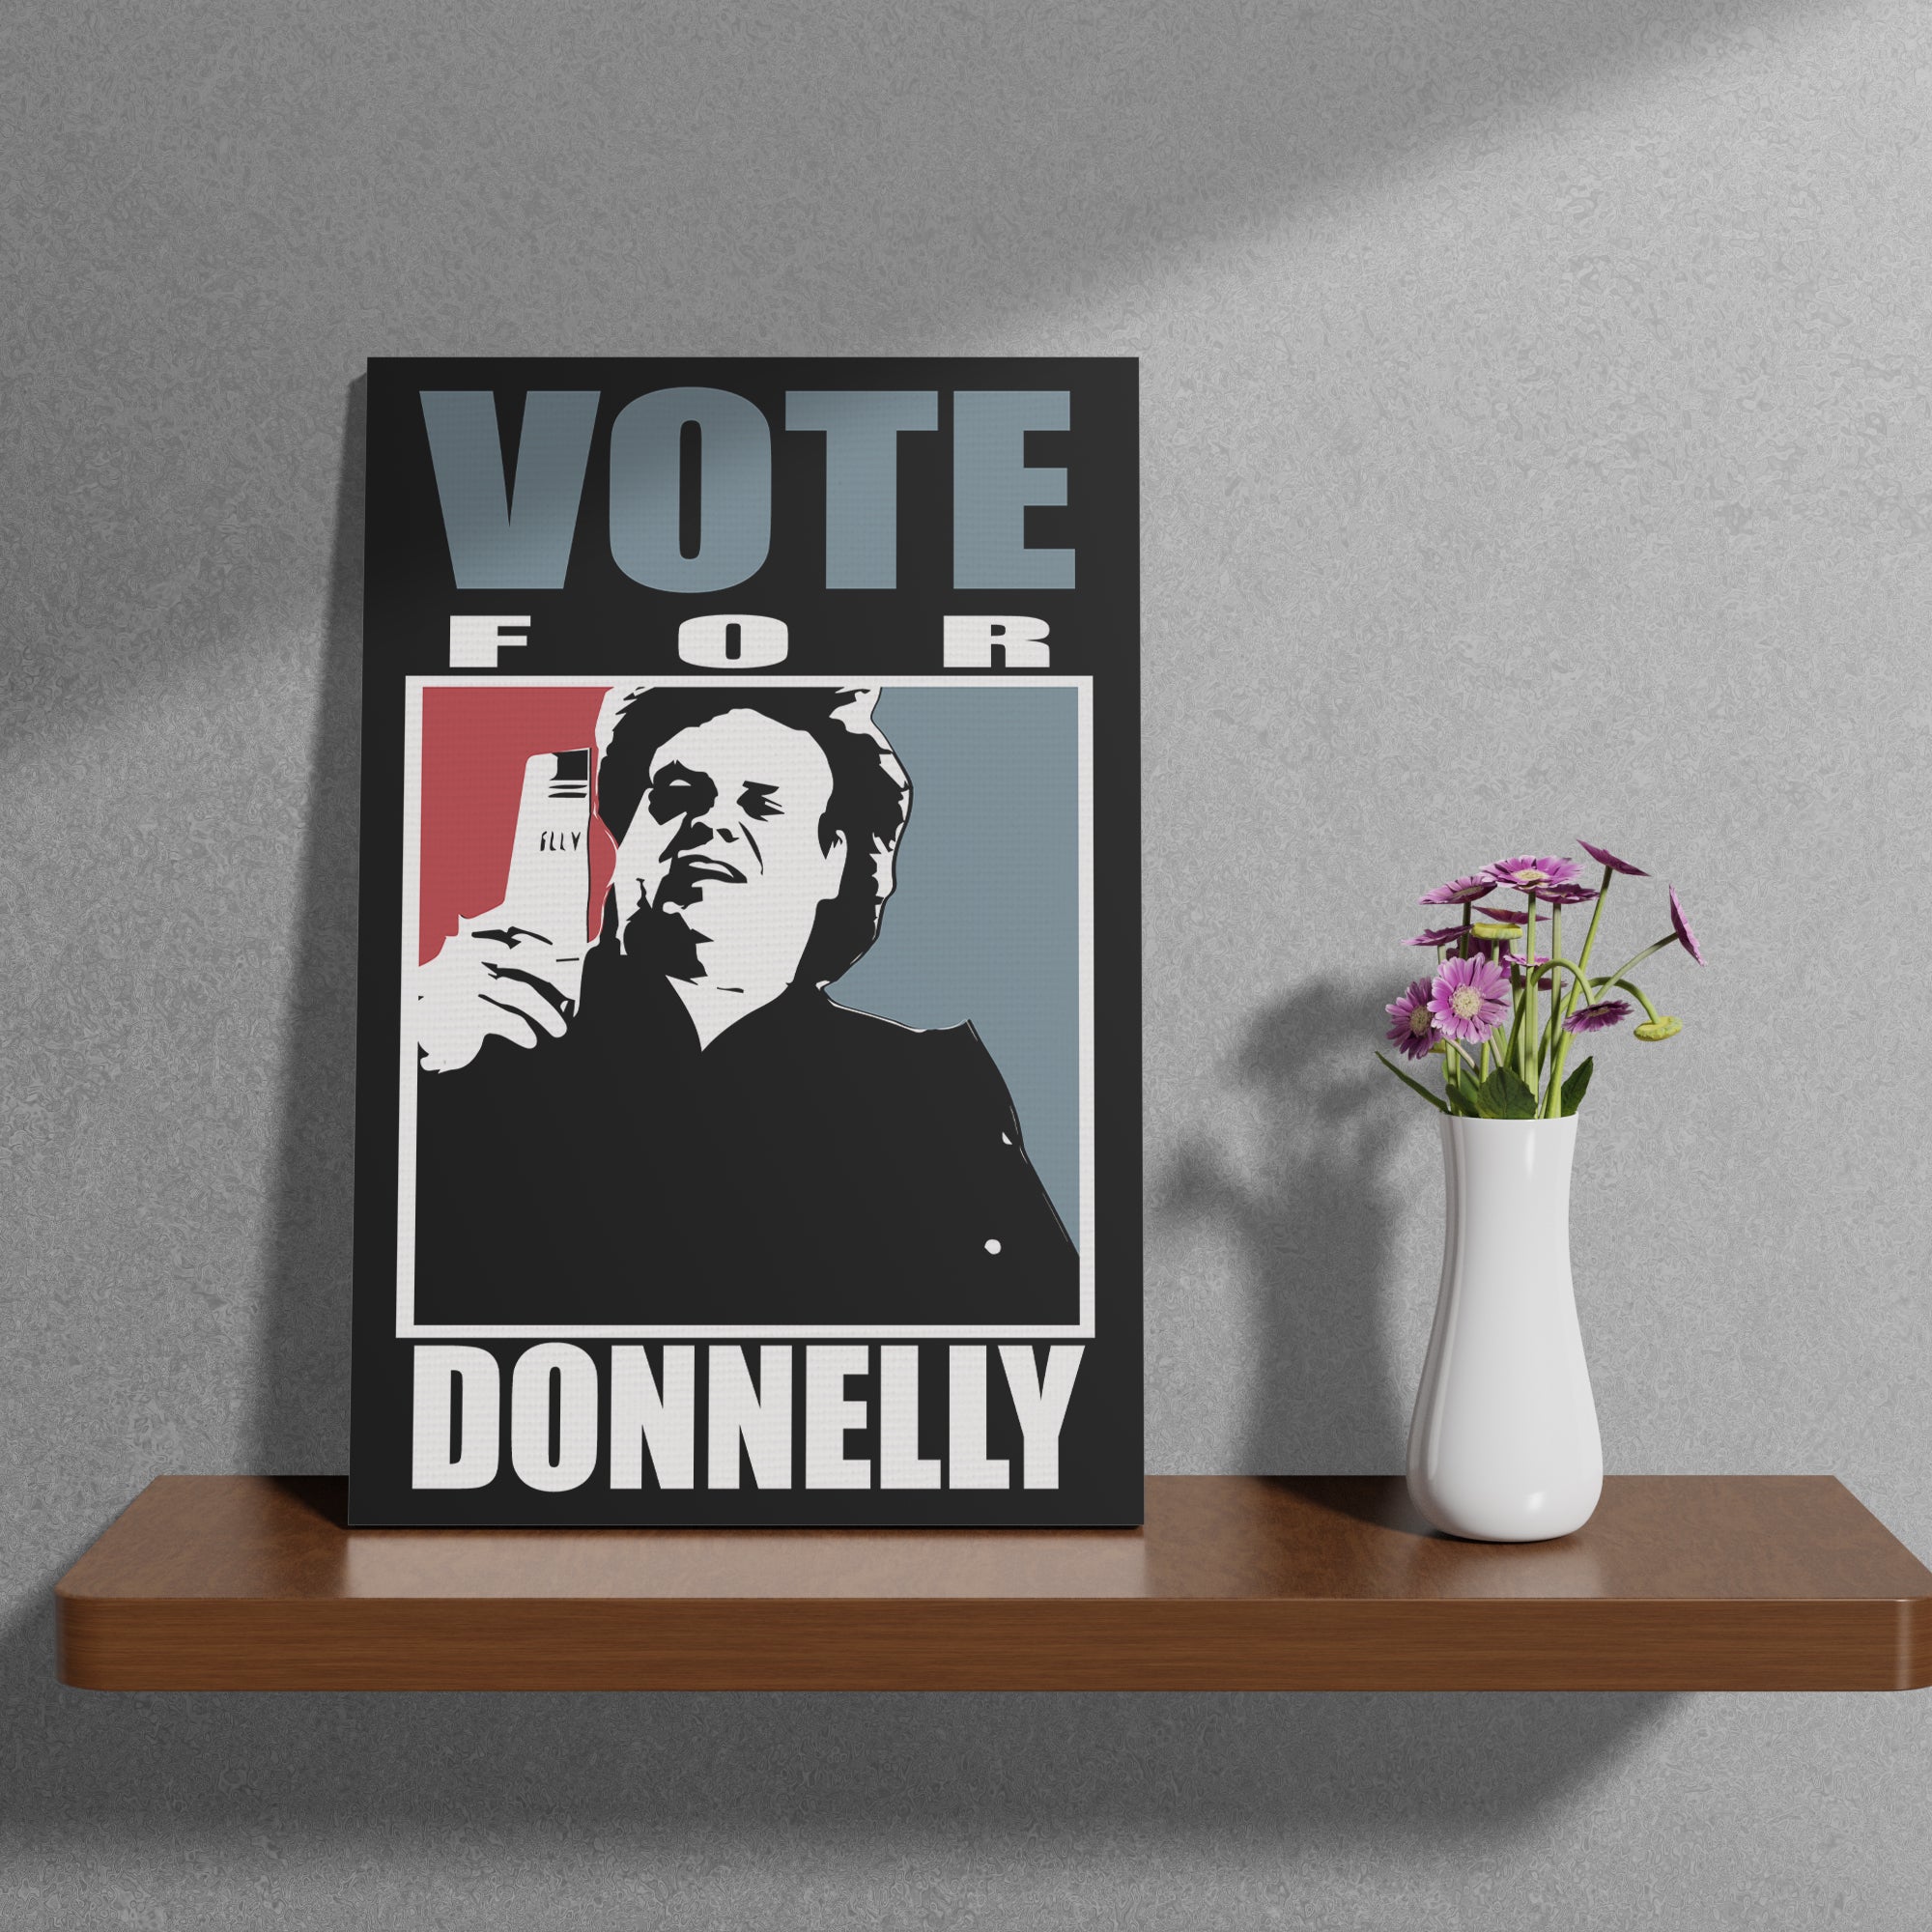 Vote for Donnelly